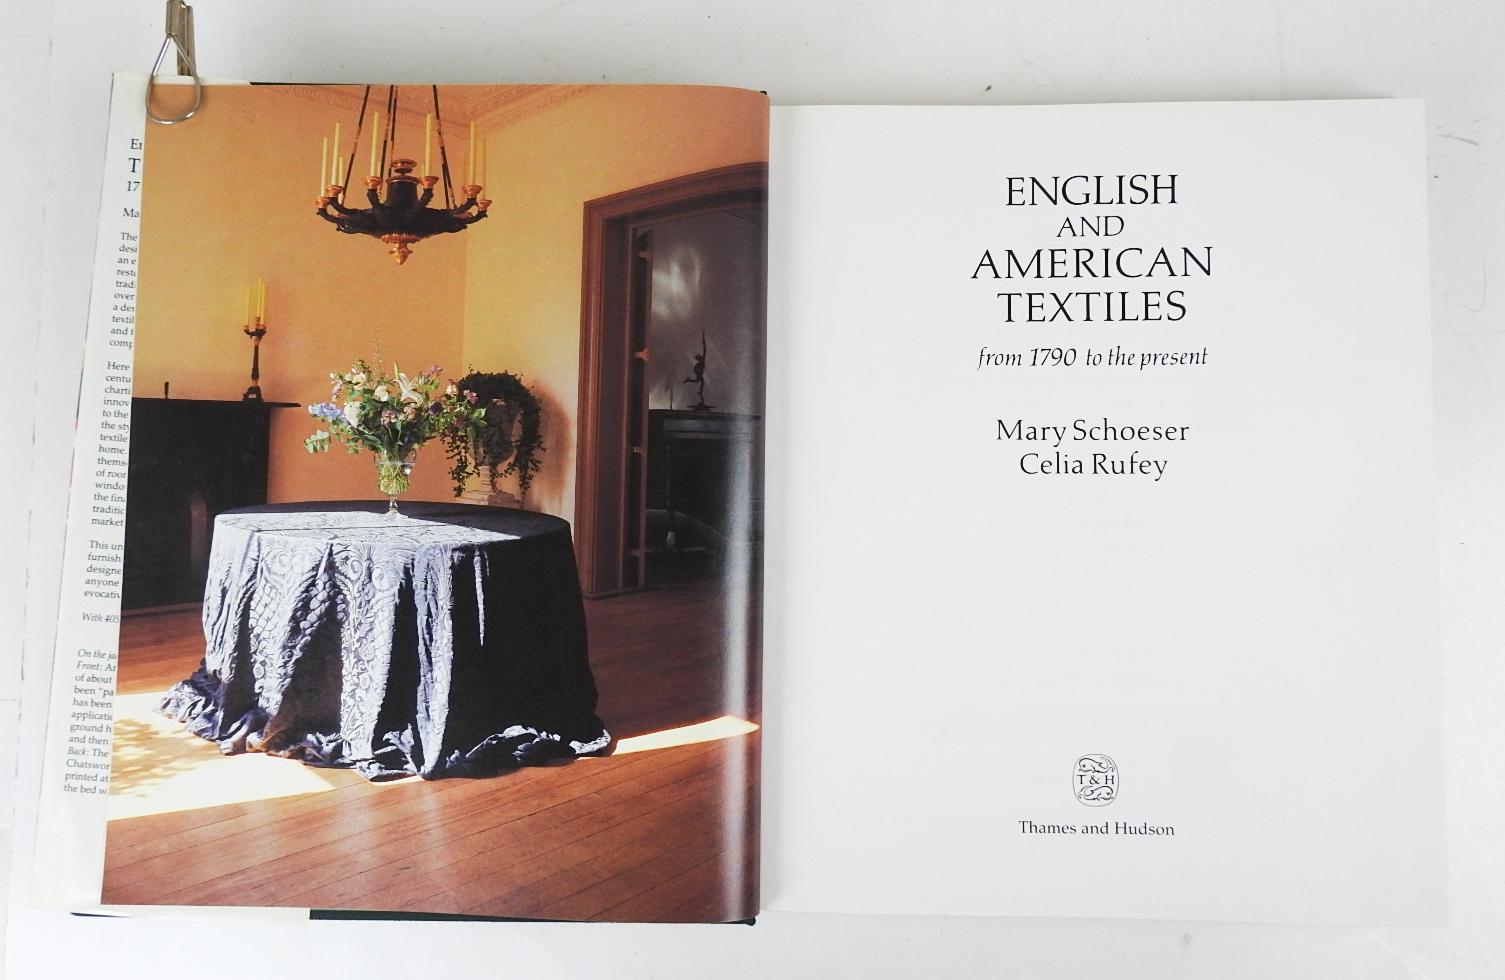 English and American Textiles: From 1790 to the Present by Mary Schoeser, Celia Rufey. 
Published by Thames & Hudson, New York, 1989.  Illustrated dust jacket, green cloth hardcover binding, many illustrations. minor shelf wear.